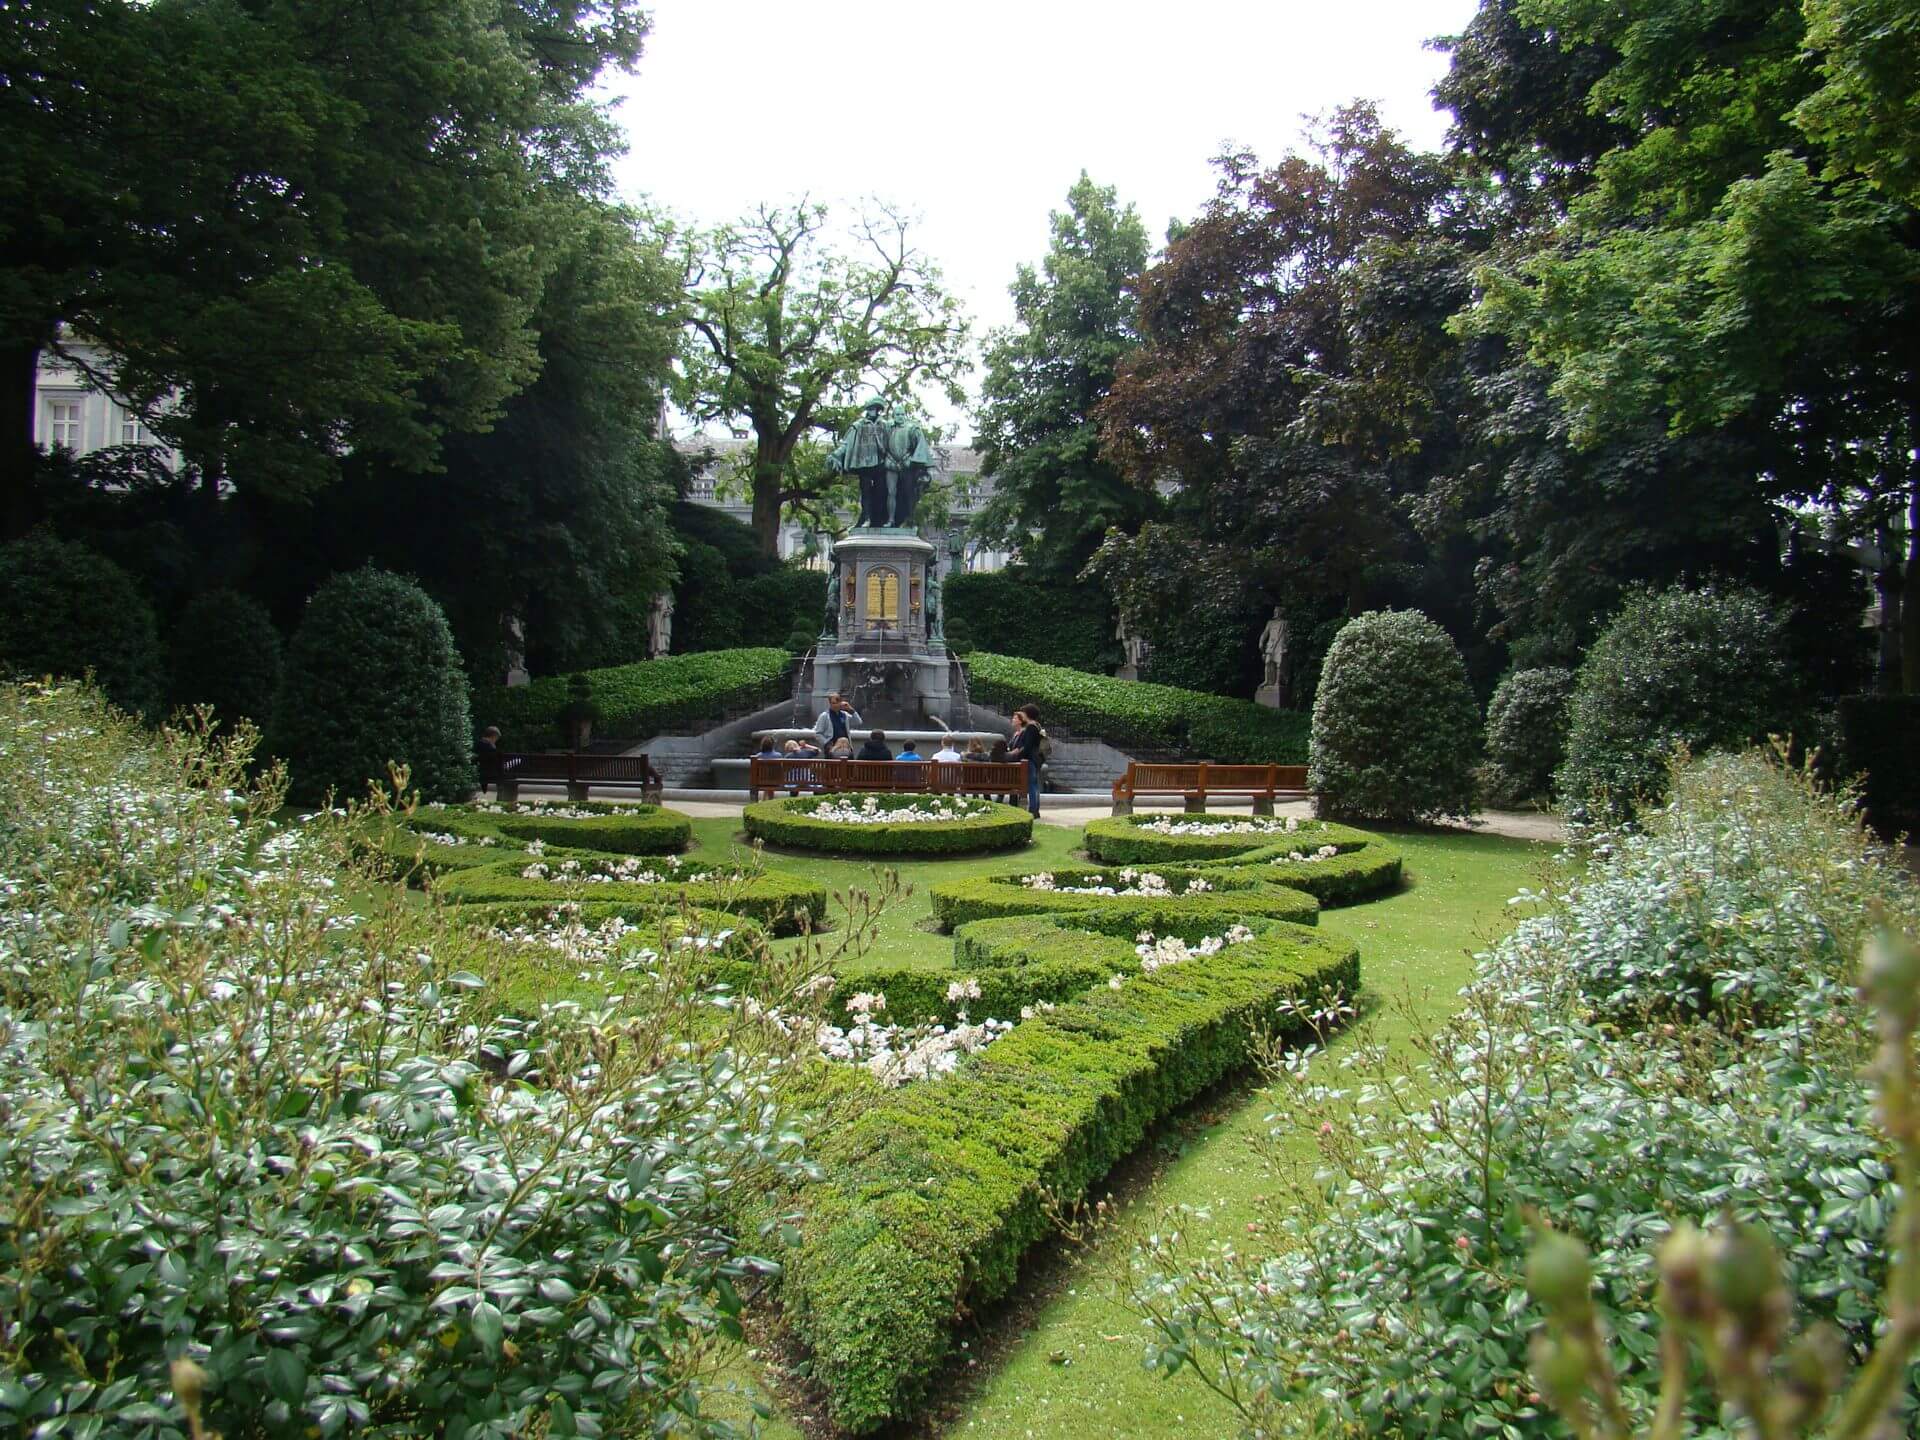 The park in Brussels